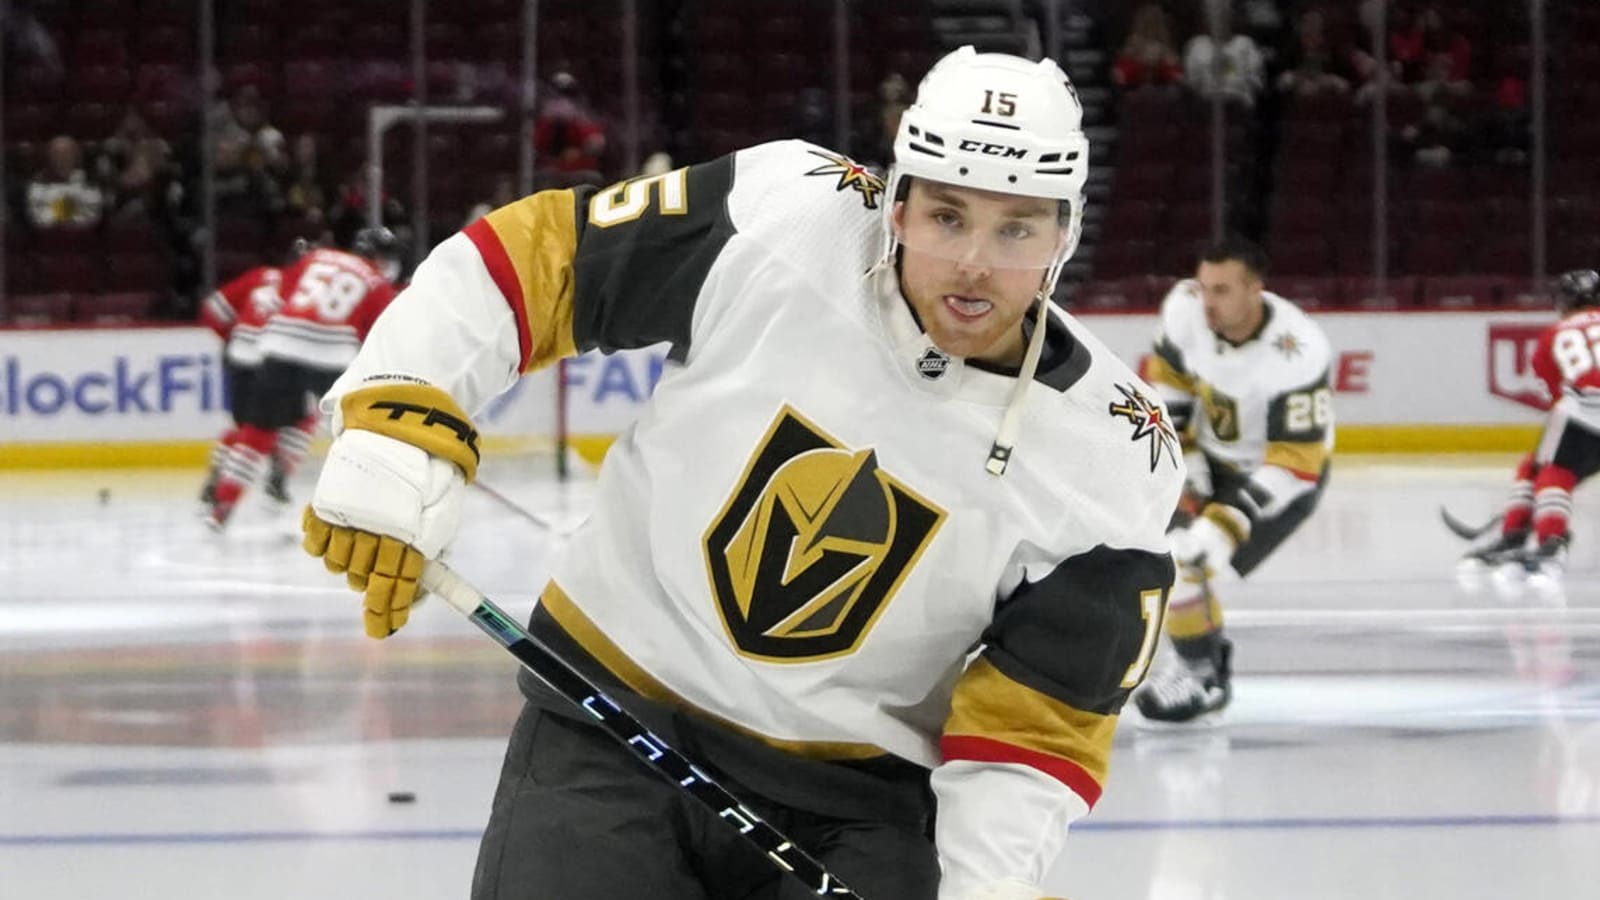 Rangers claim Leschyshyn off waivers from Golden Knights